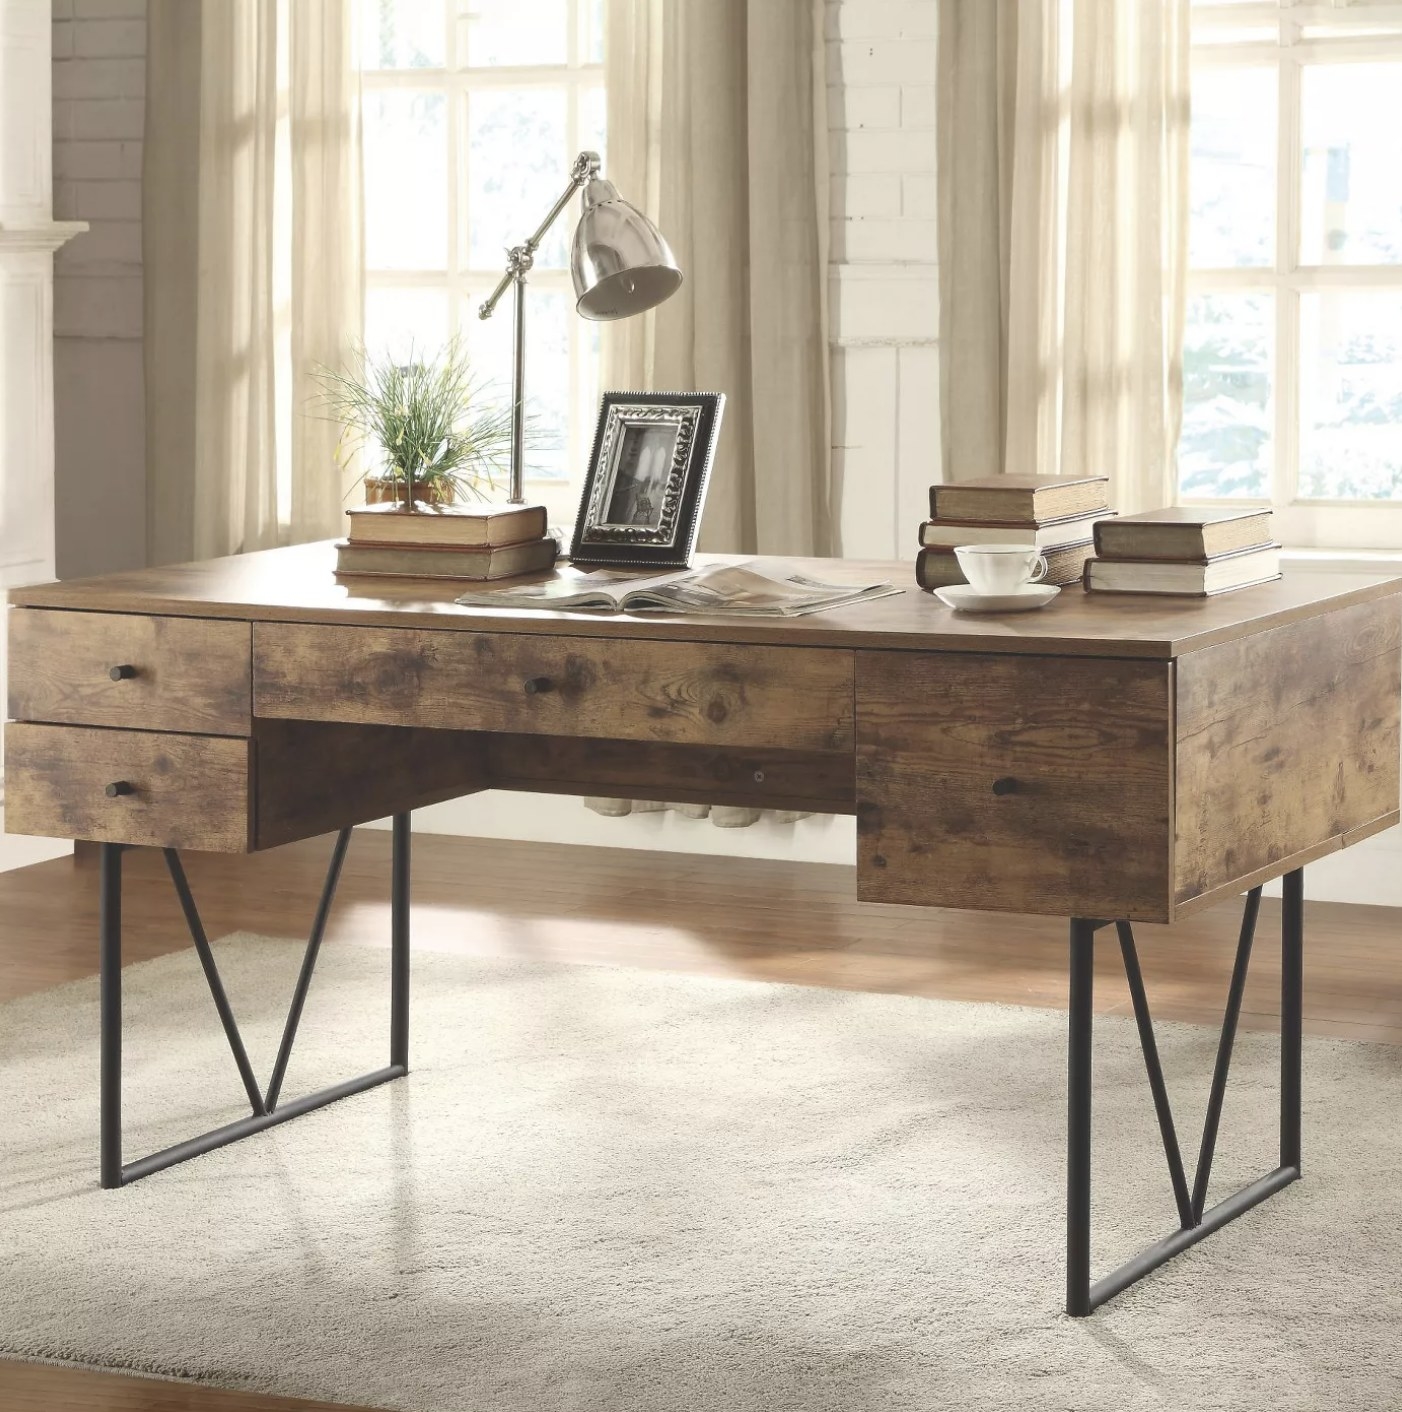 The wood desk in a living space